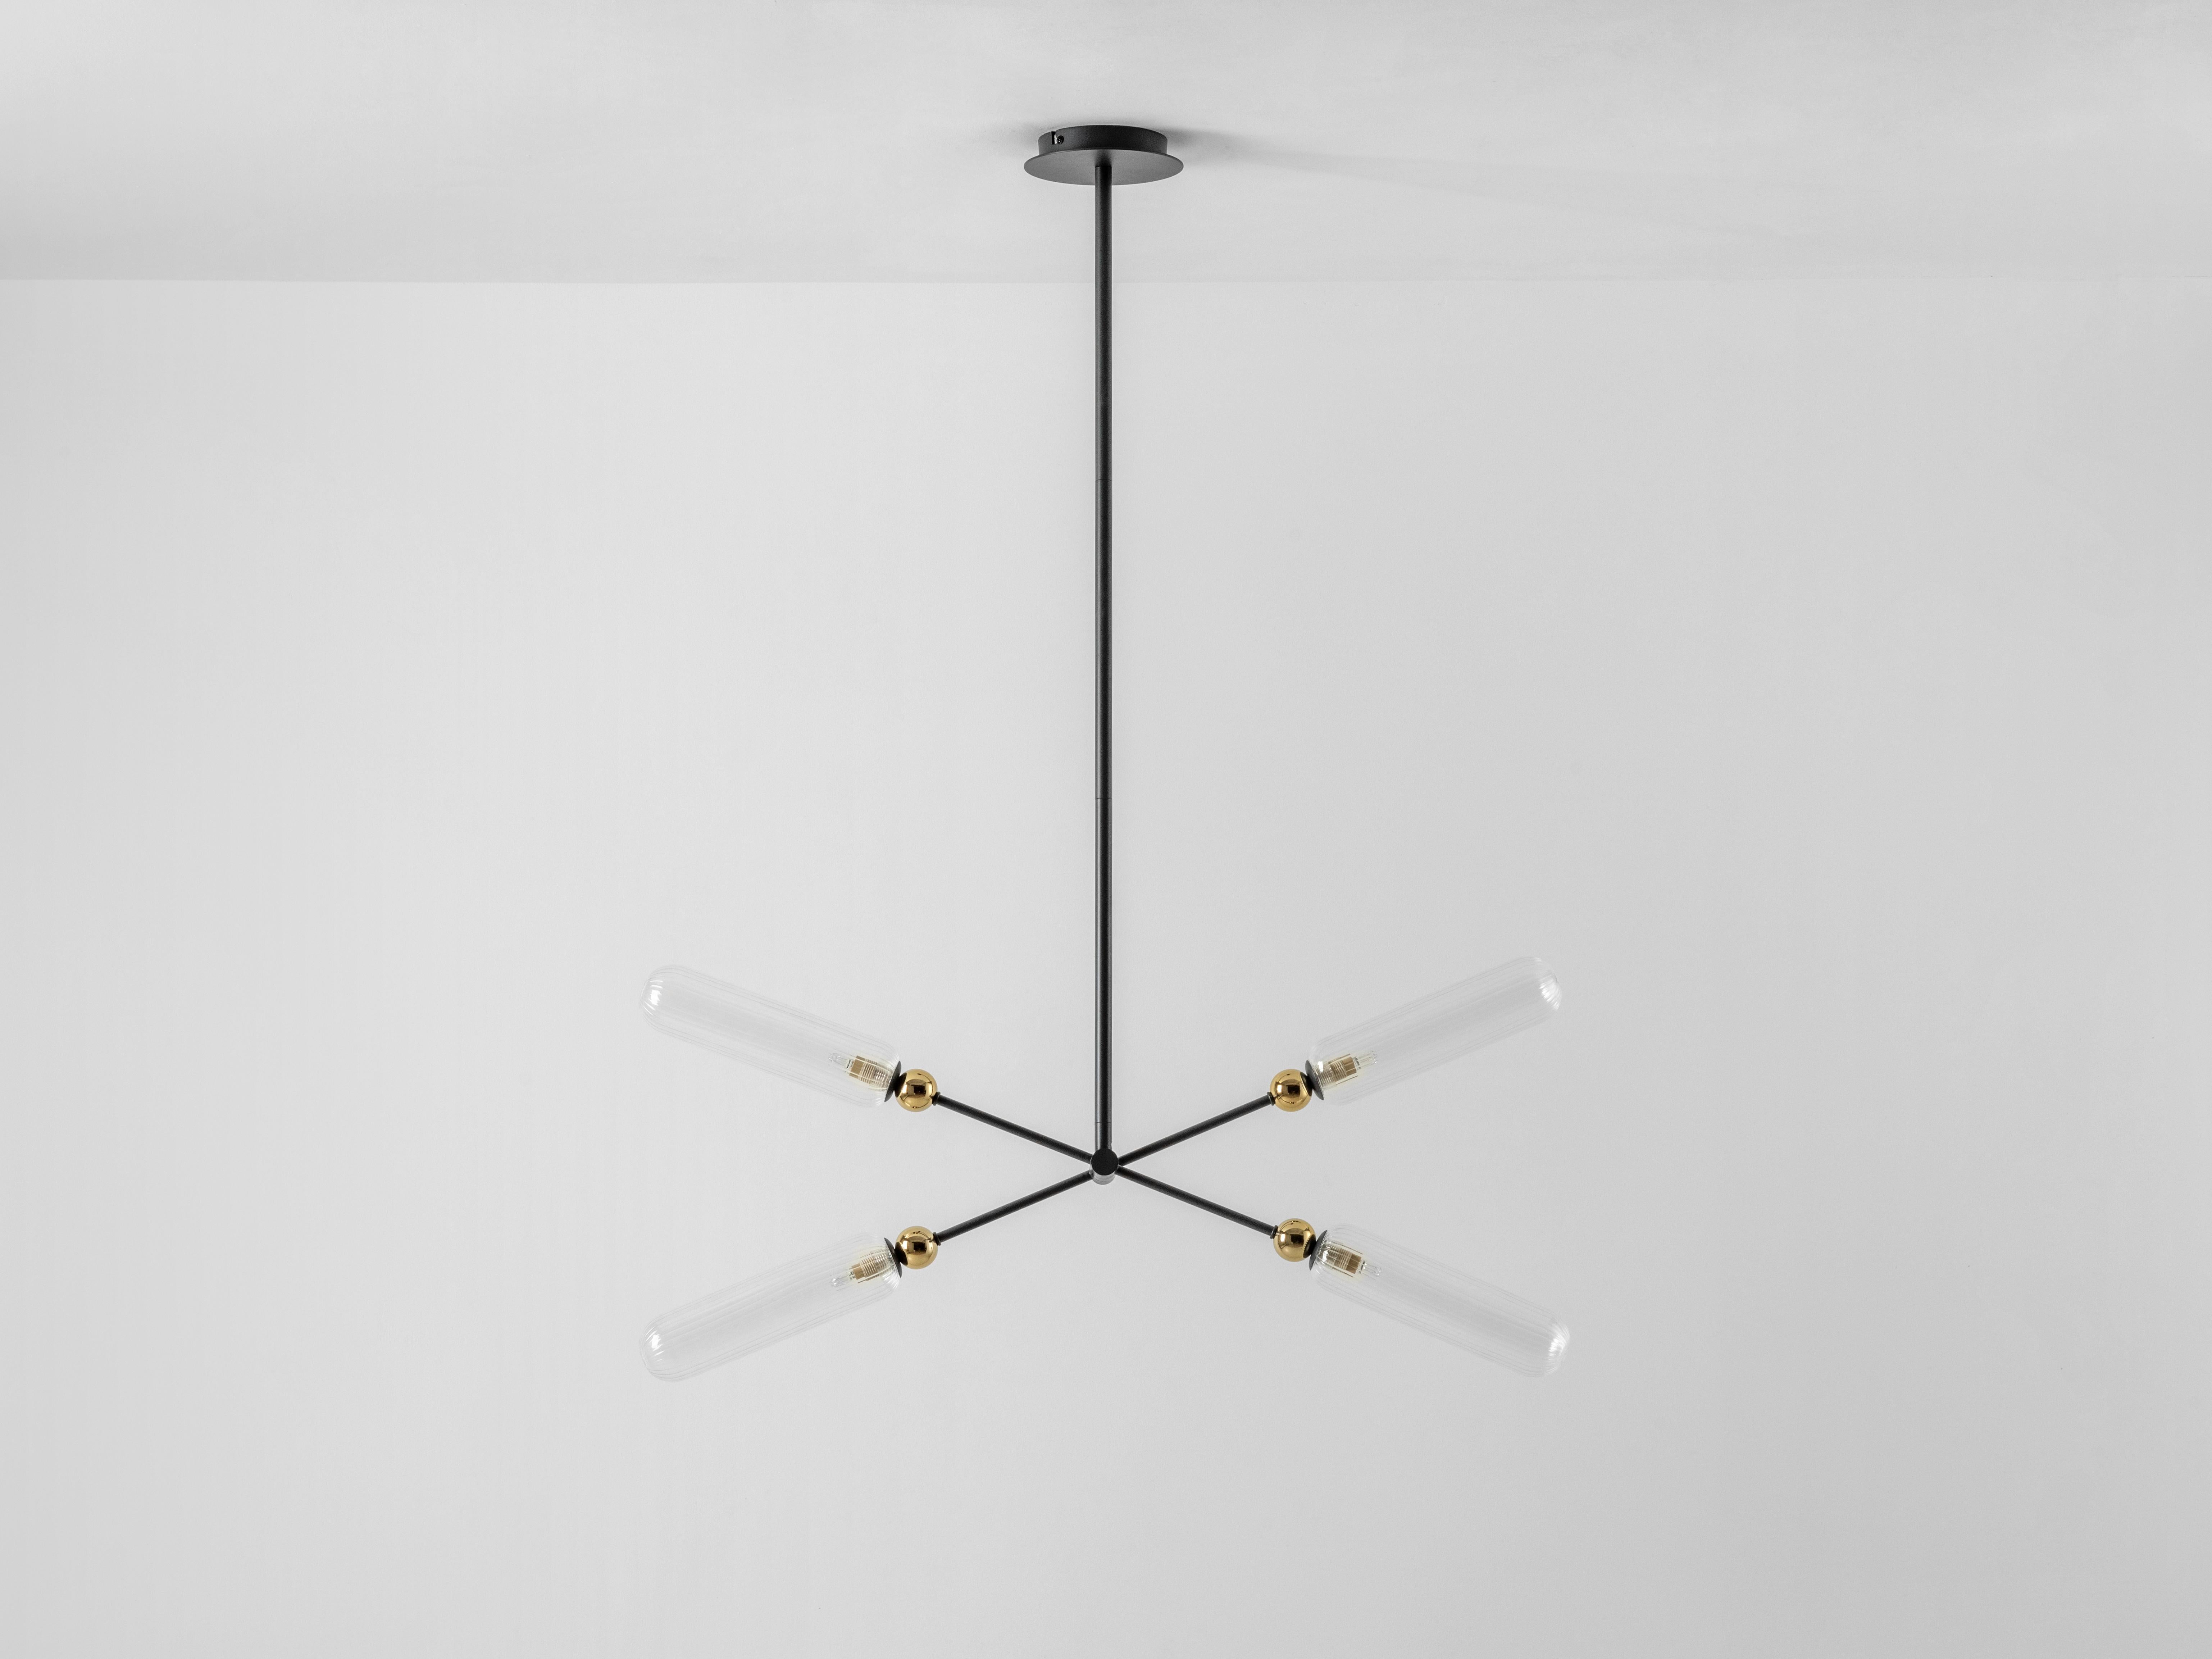 Adjustable, cross arms make this beautiful chandelier even more flexible and practical. Ideal for above the kitchen island or a dining table, simply move the arms to create the perfect ambiance for your space. Painted charcoal grey metal, with brass